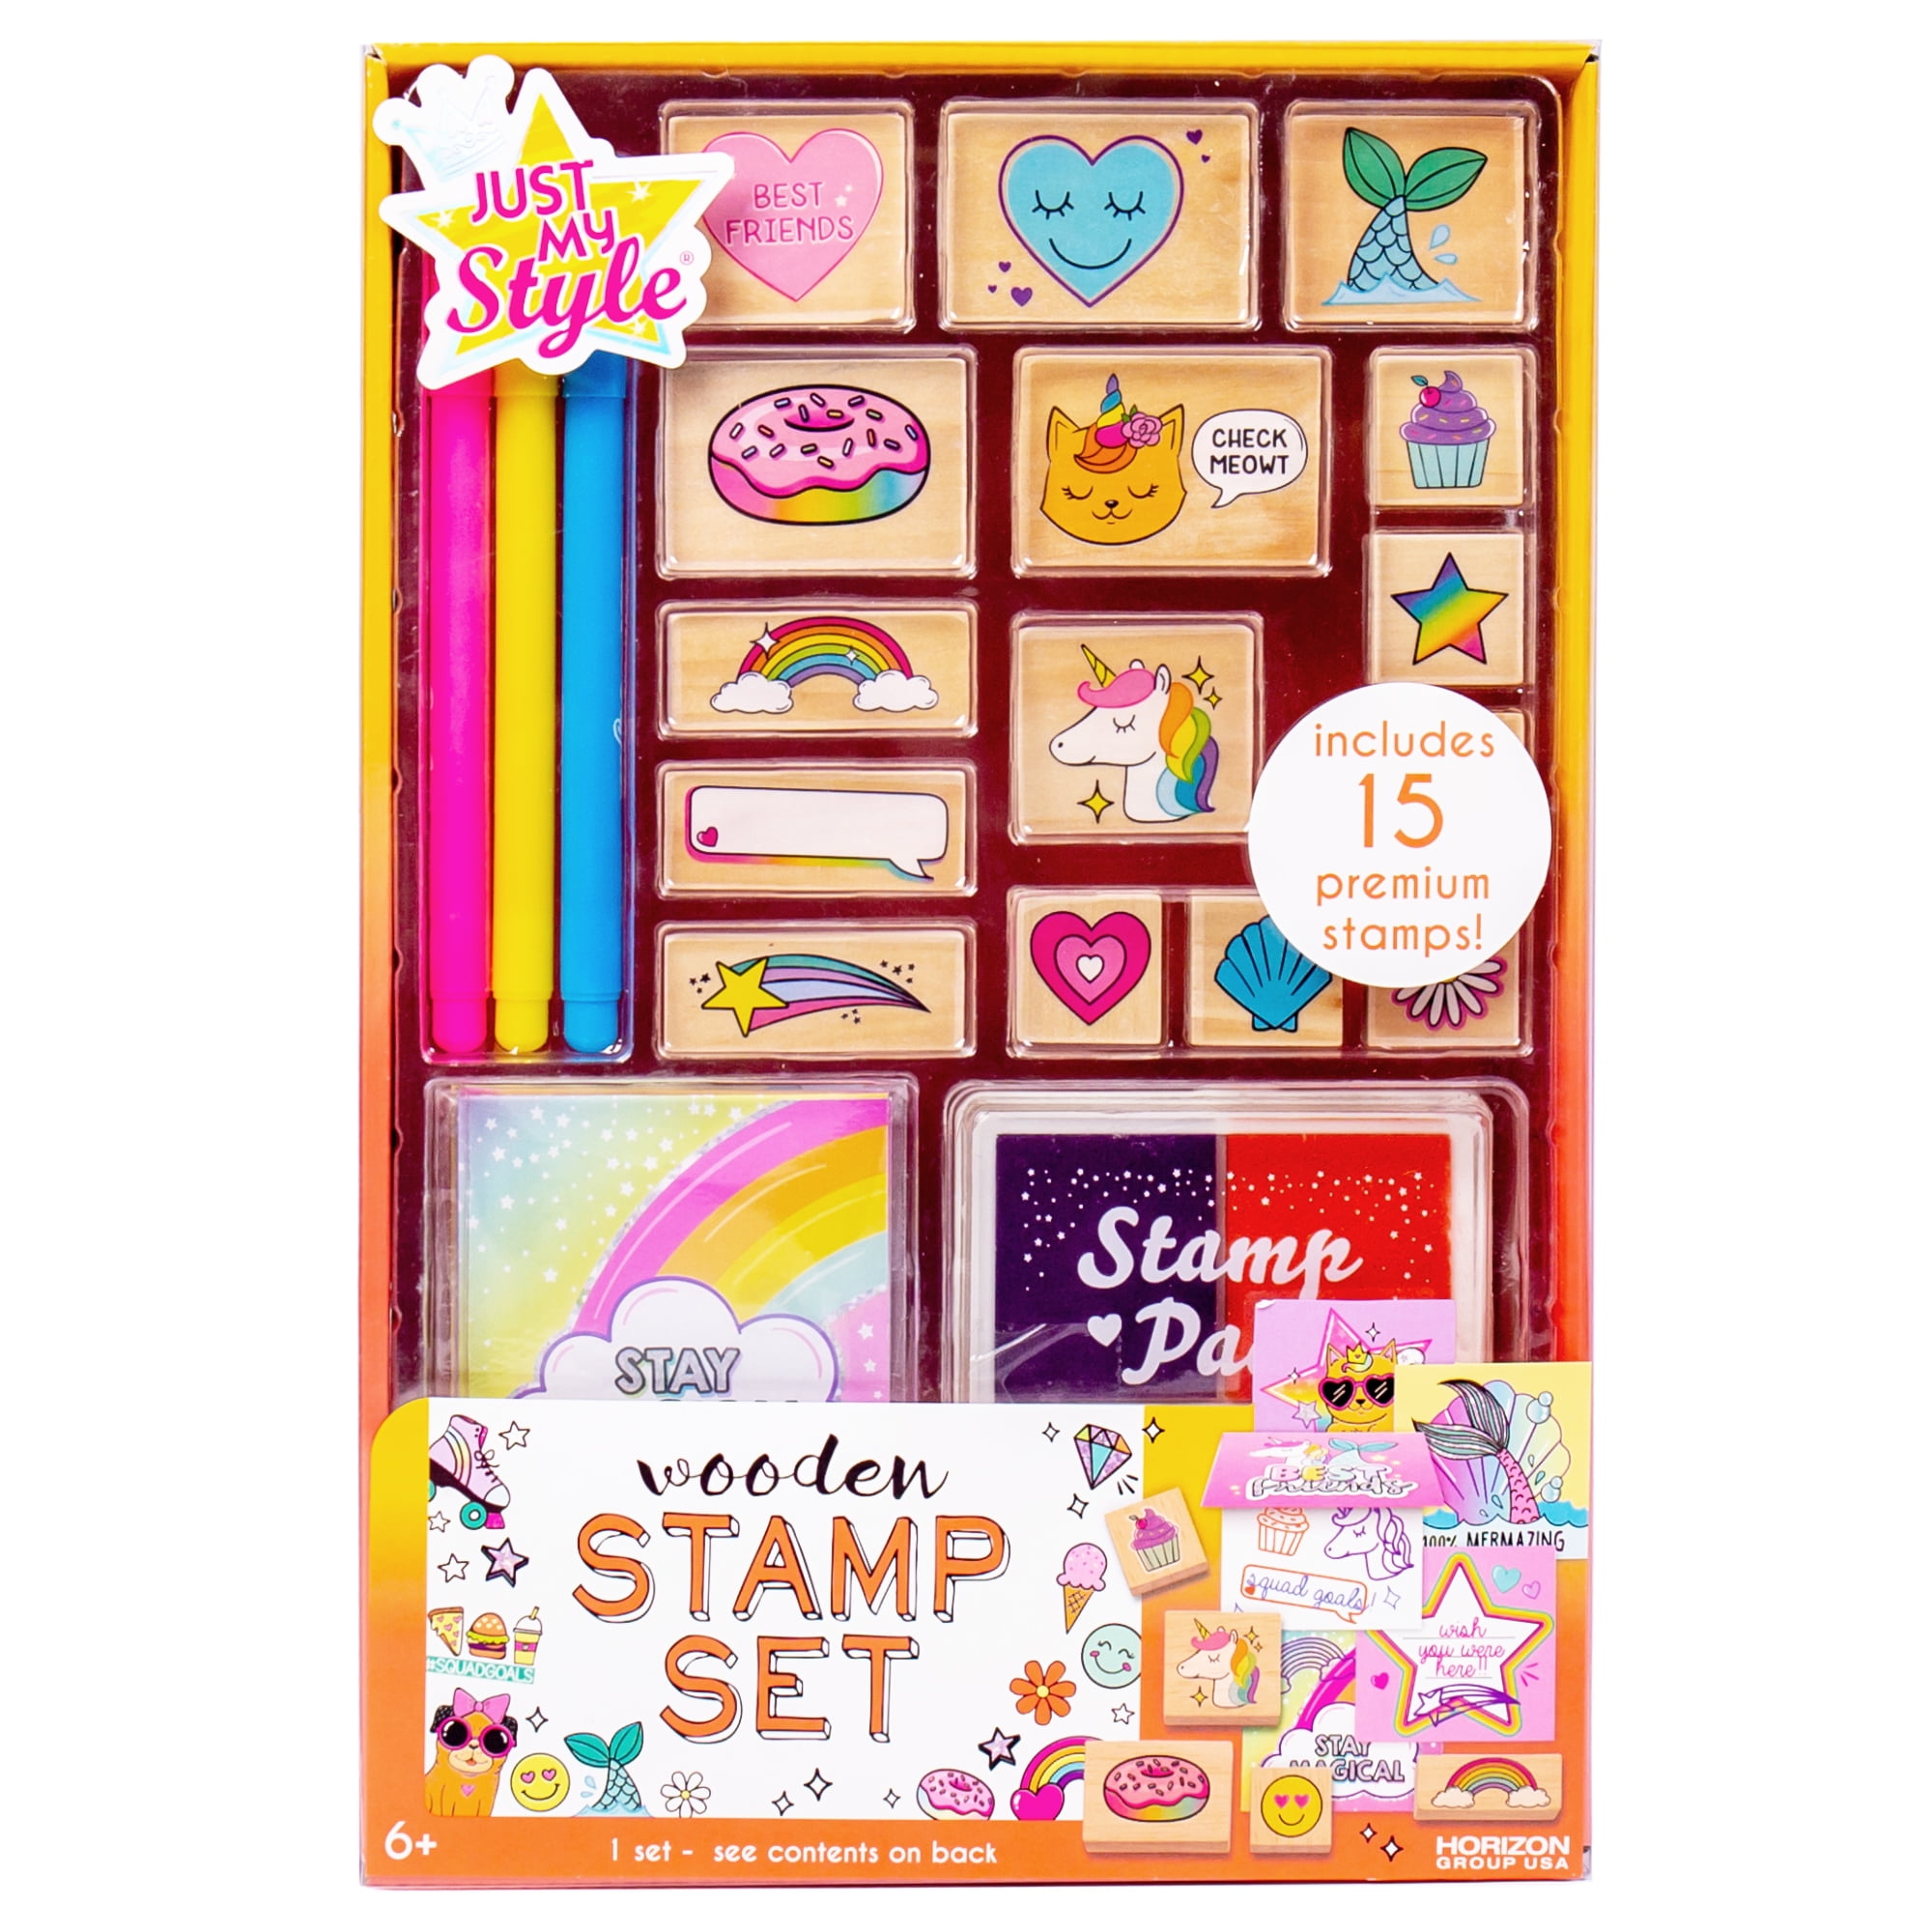 Craft Kit Foam Stampers With Ink Pad Stamps Children's 9 Piece Fairy Princess 